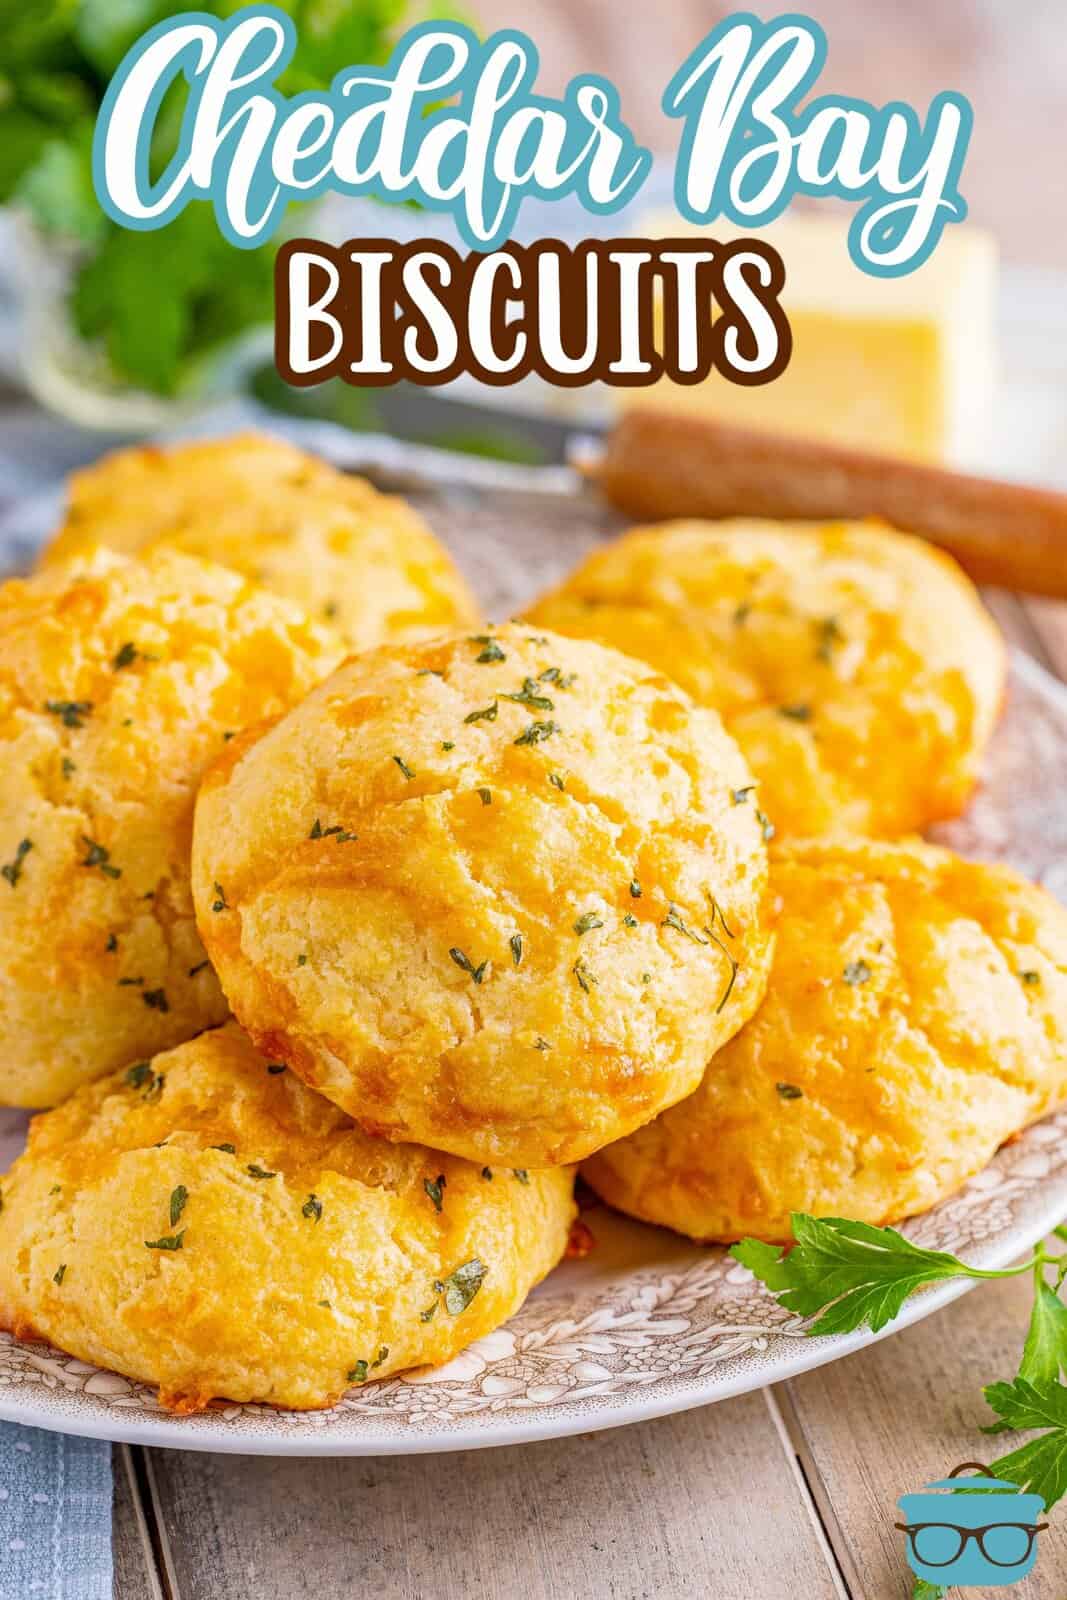 A few homemade Cheddar Bay Biscuits that are a copycat from Red Lobster.